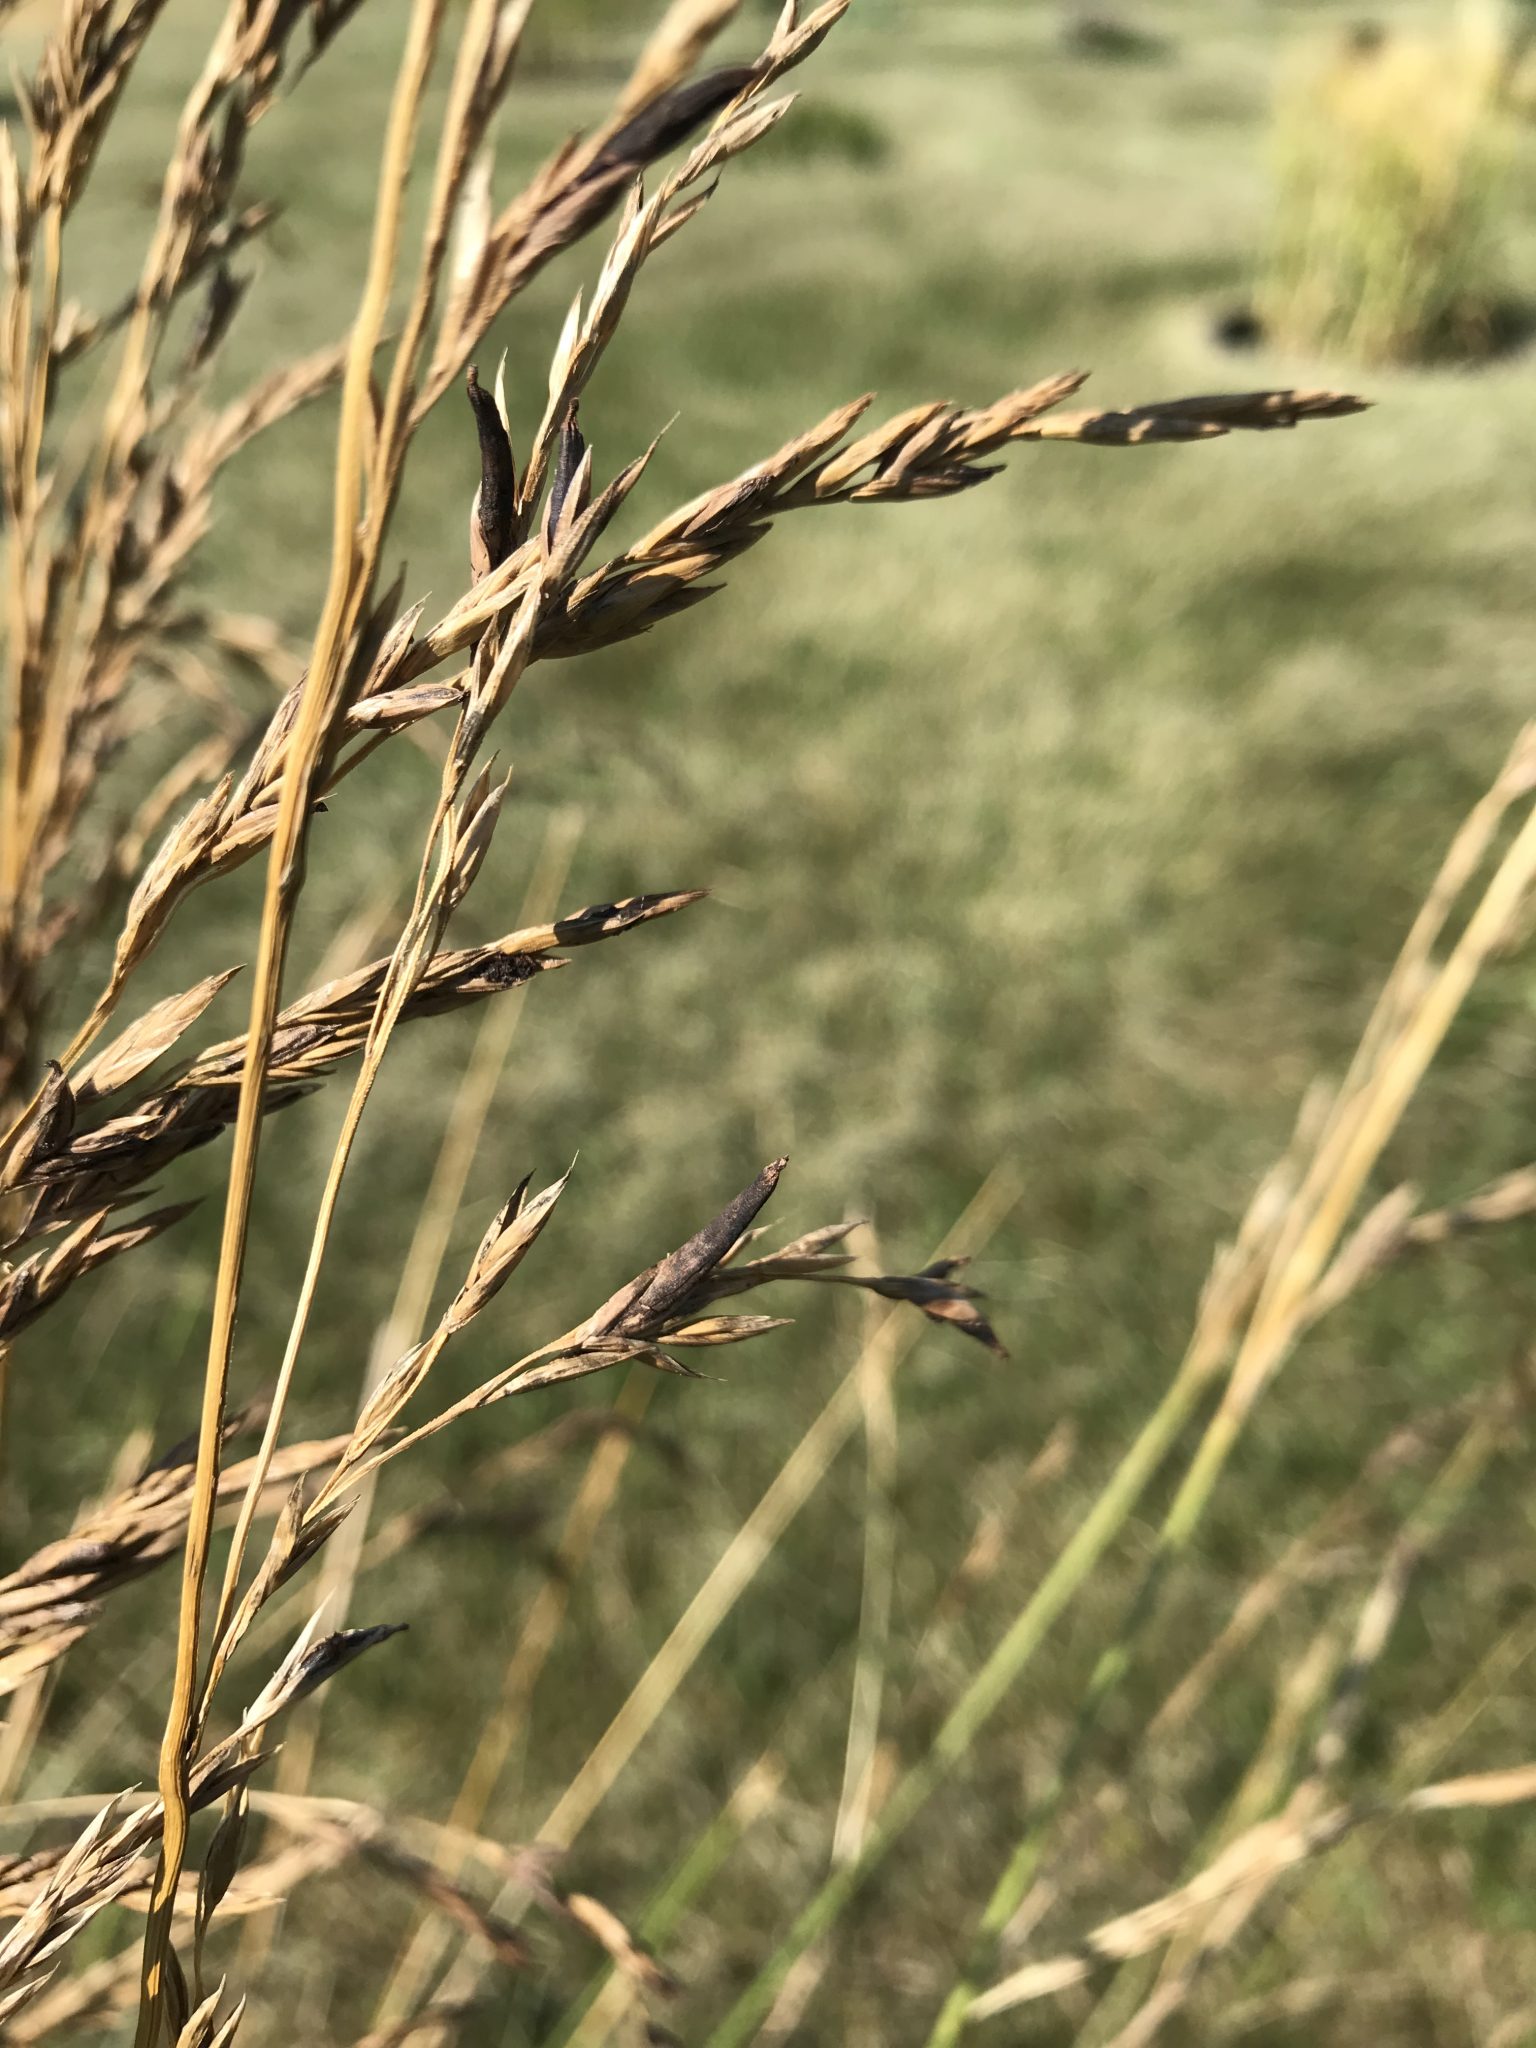 Tall fescue seed head infected with ergot.